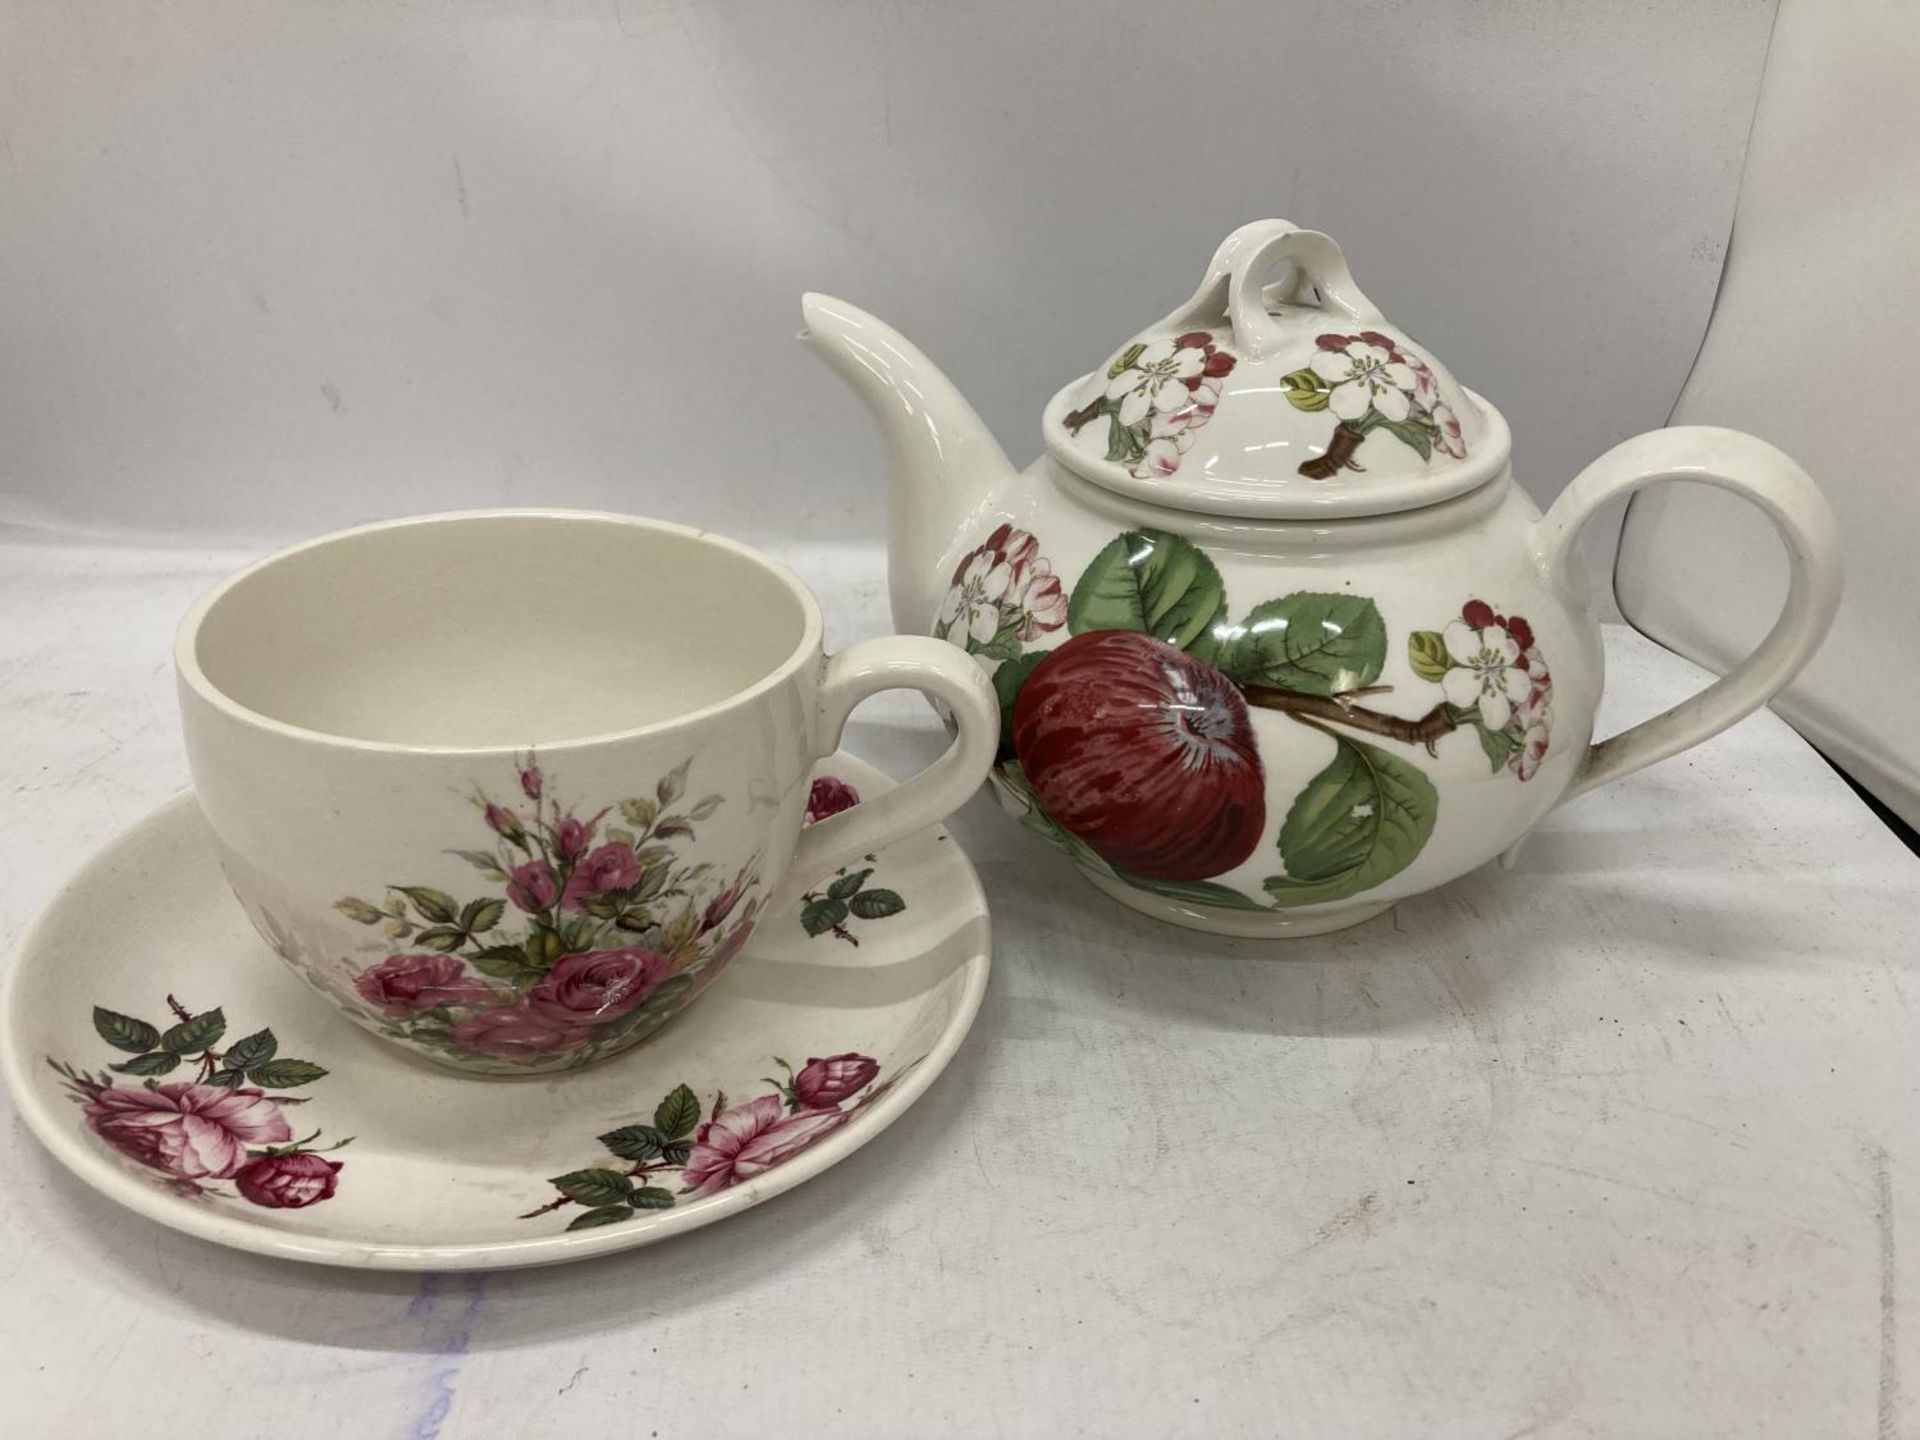 THREE PIECES OF PORTMEIRION TO INCLUDE A TEAPOT, A LARGE CUP AND SAUCER